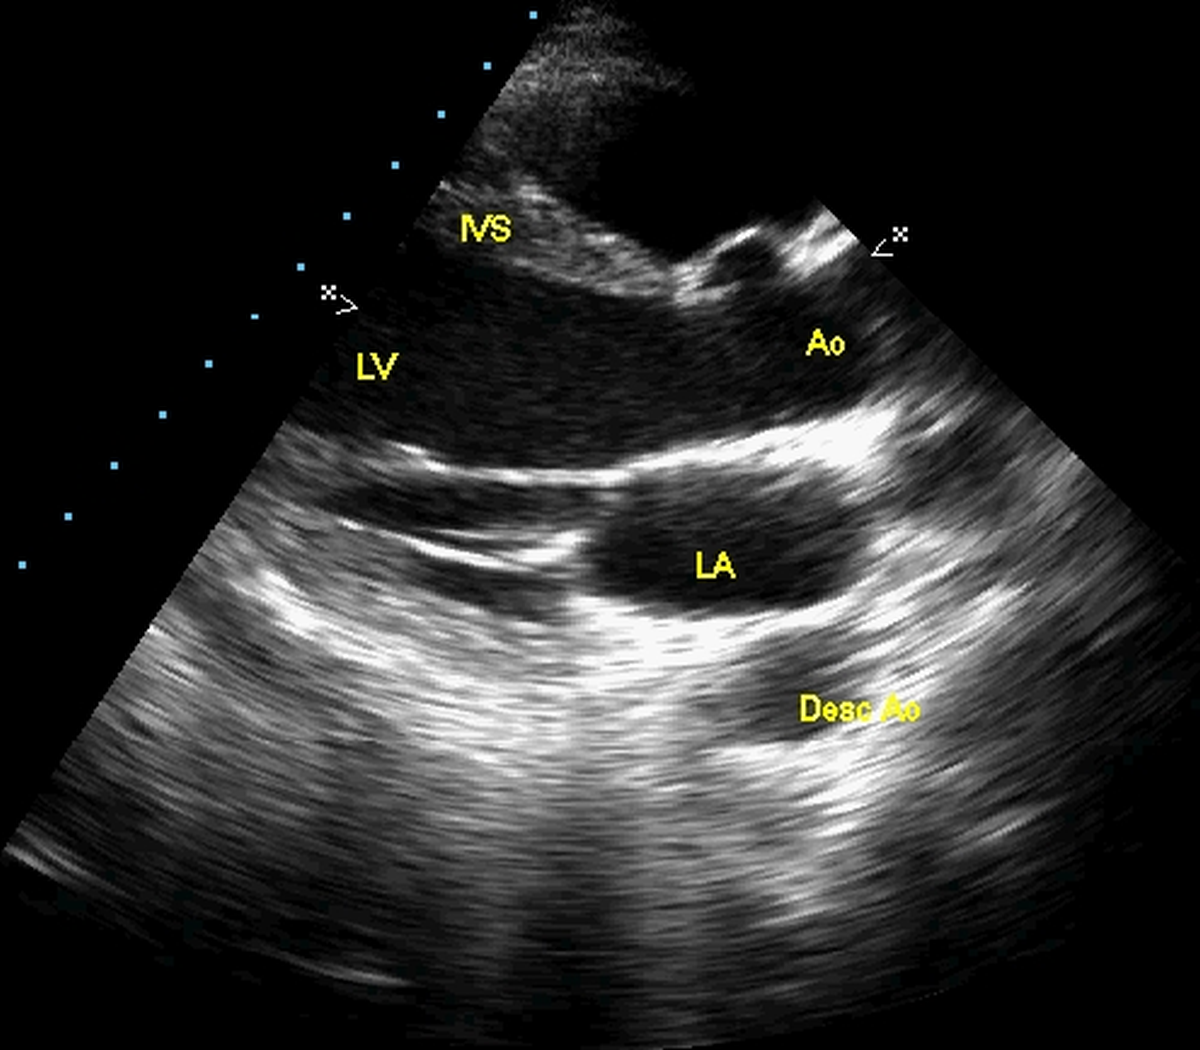 Echocardiogram In Plax View With Video All About Cardiovascular